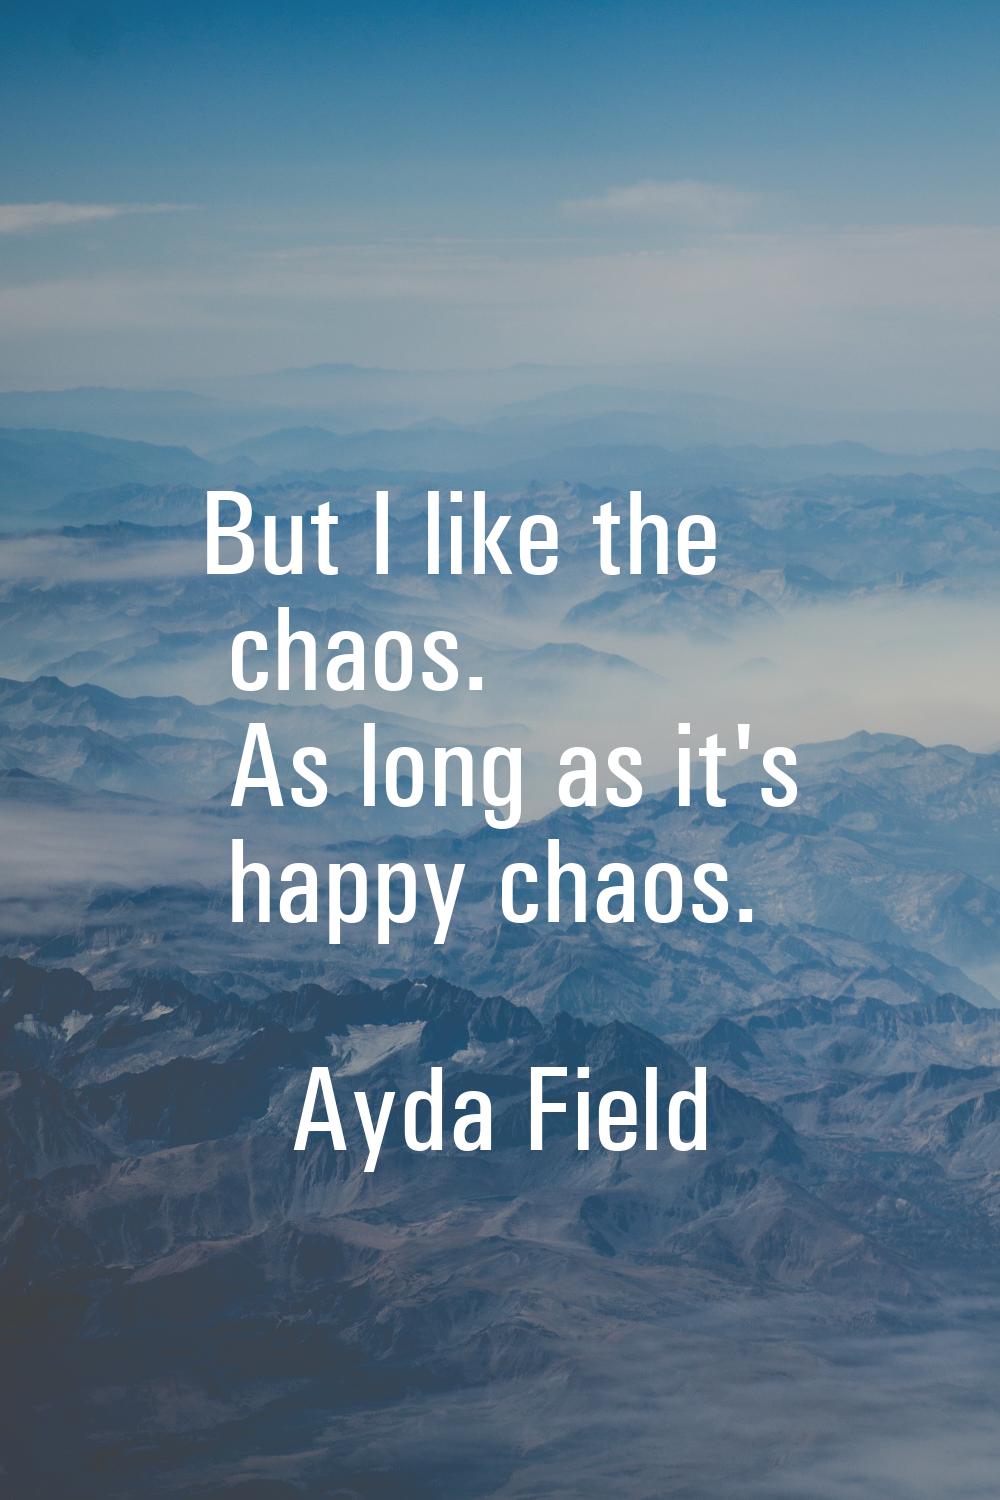 But I like the chaos. As long as it's happy chaos.